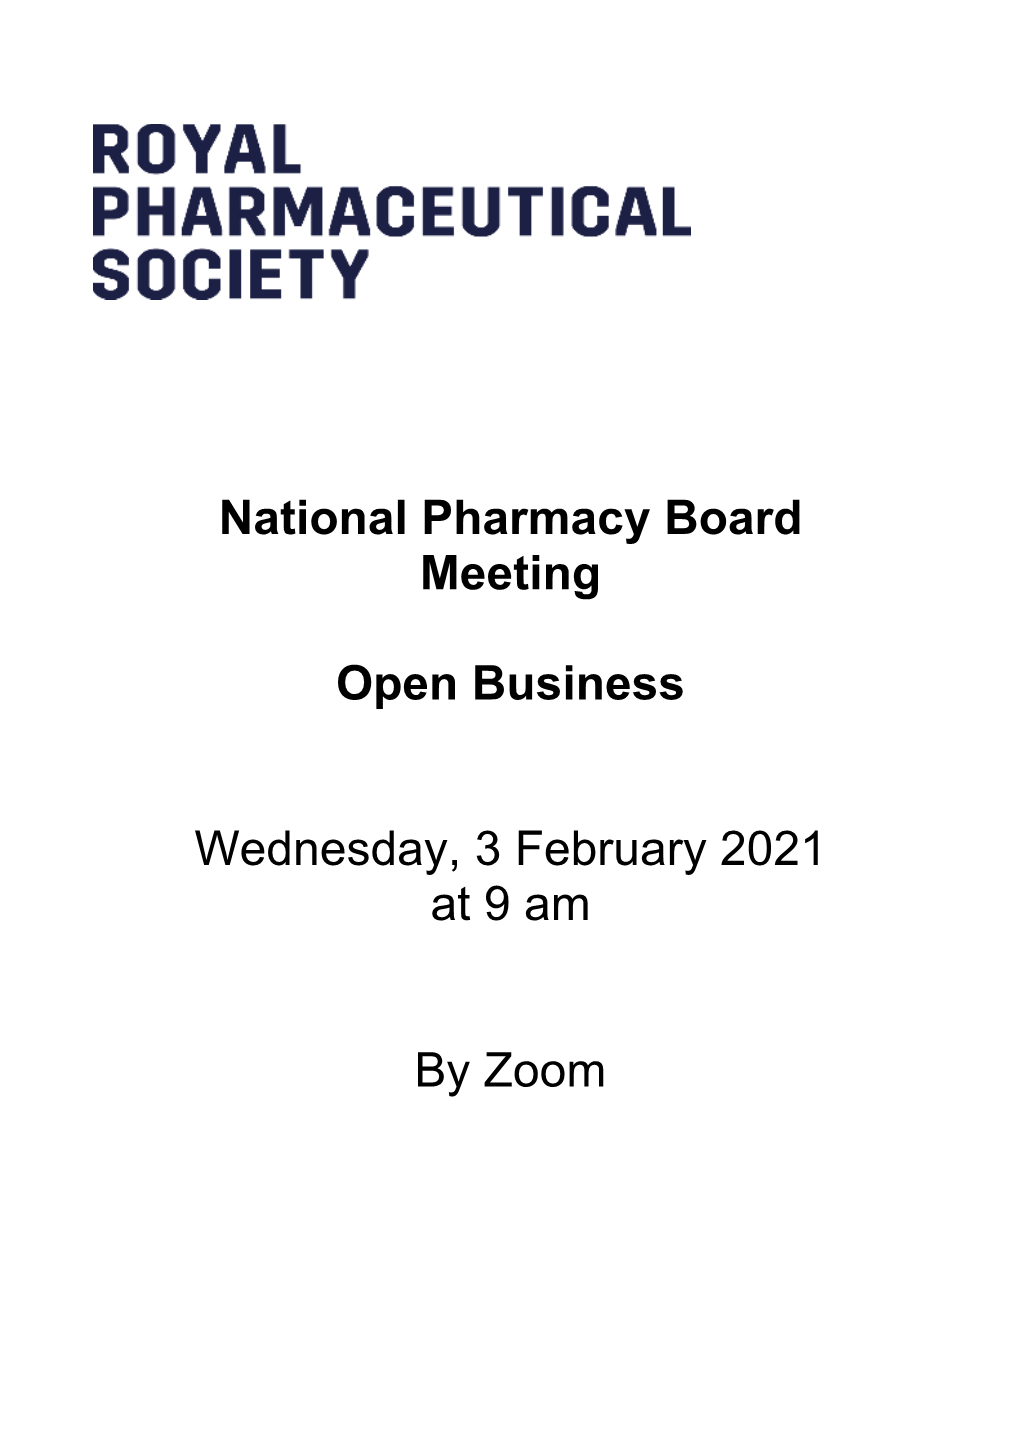 National Pharmacy Board Meeting Open Business Wednesday, 3